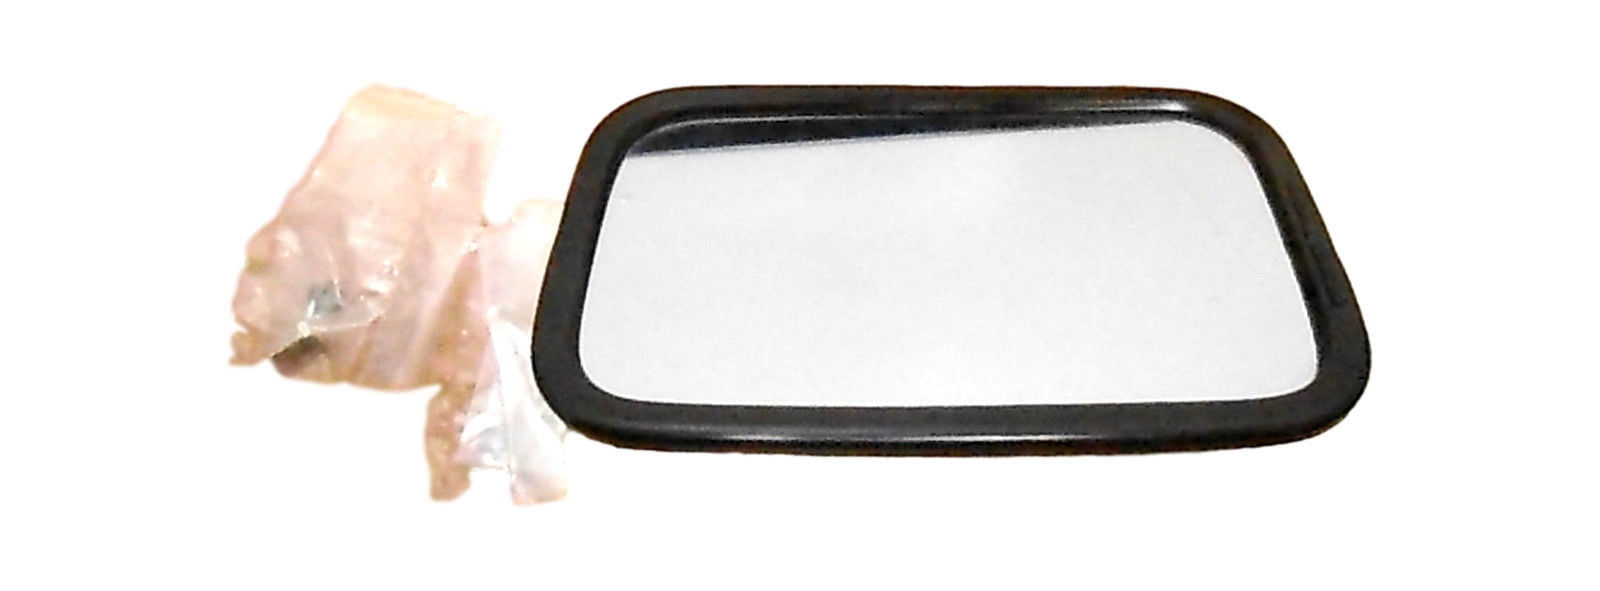 NEW SIGNAL STAT 7040 MIRROR ASSY FOR TRUCKS PU'S MADE IN USA 5" X 9" MALE